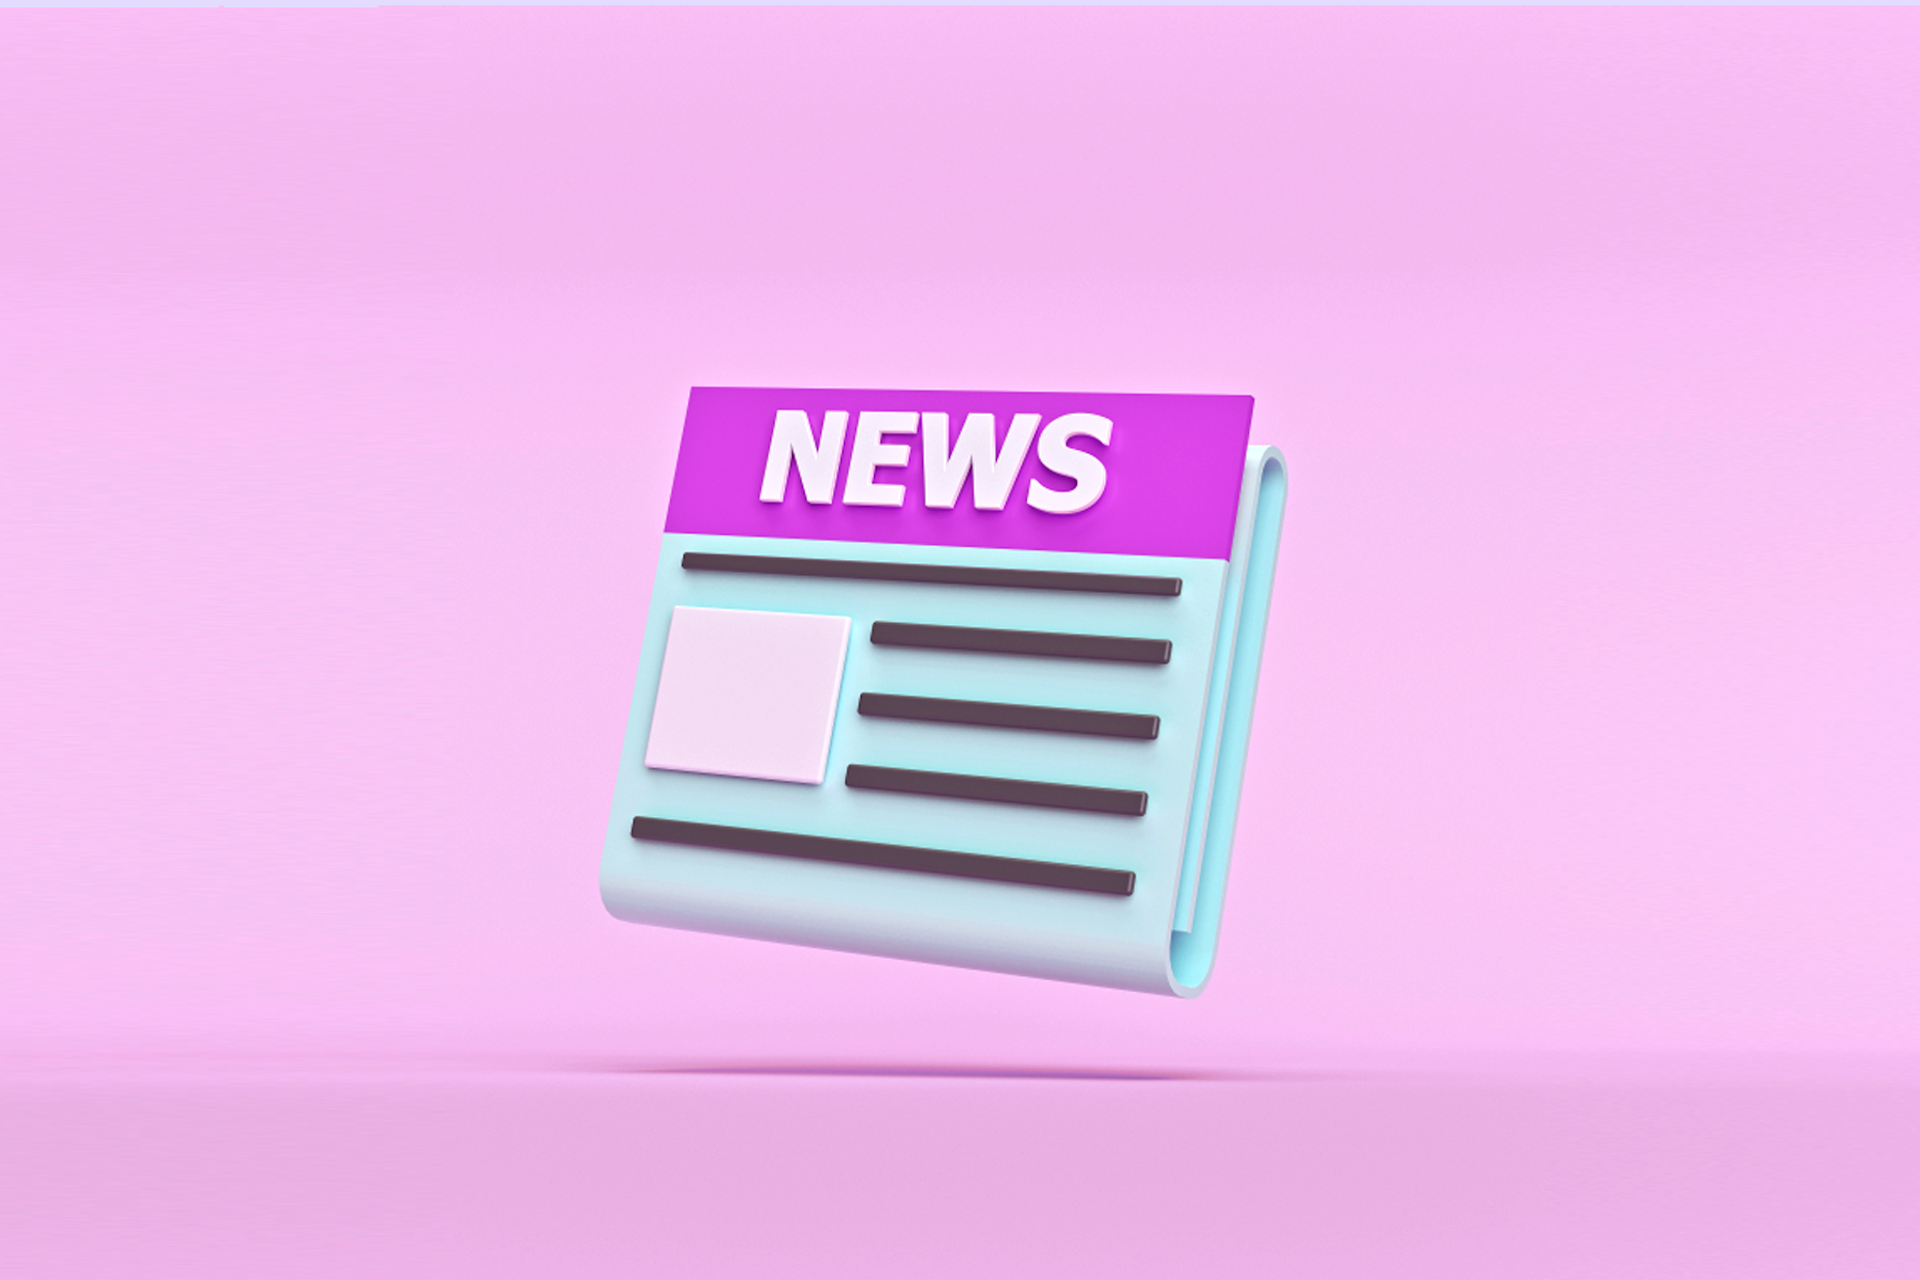 Looking for the latest social media news? This blog has it. This image of a cartoon newspaper against a solid pink background conveys the message that news is being broadcast